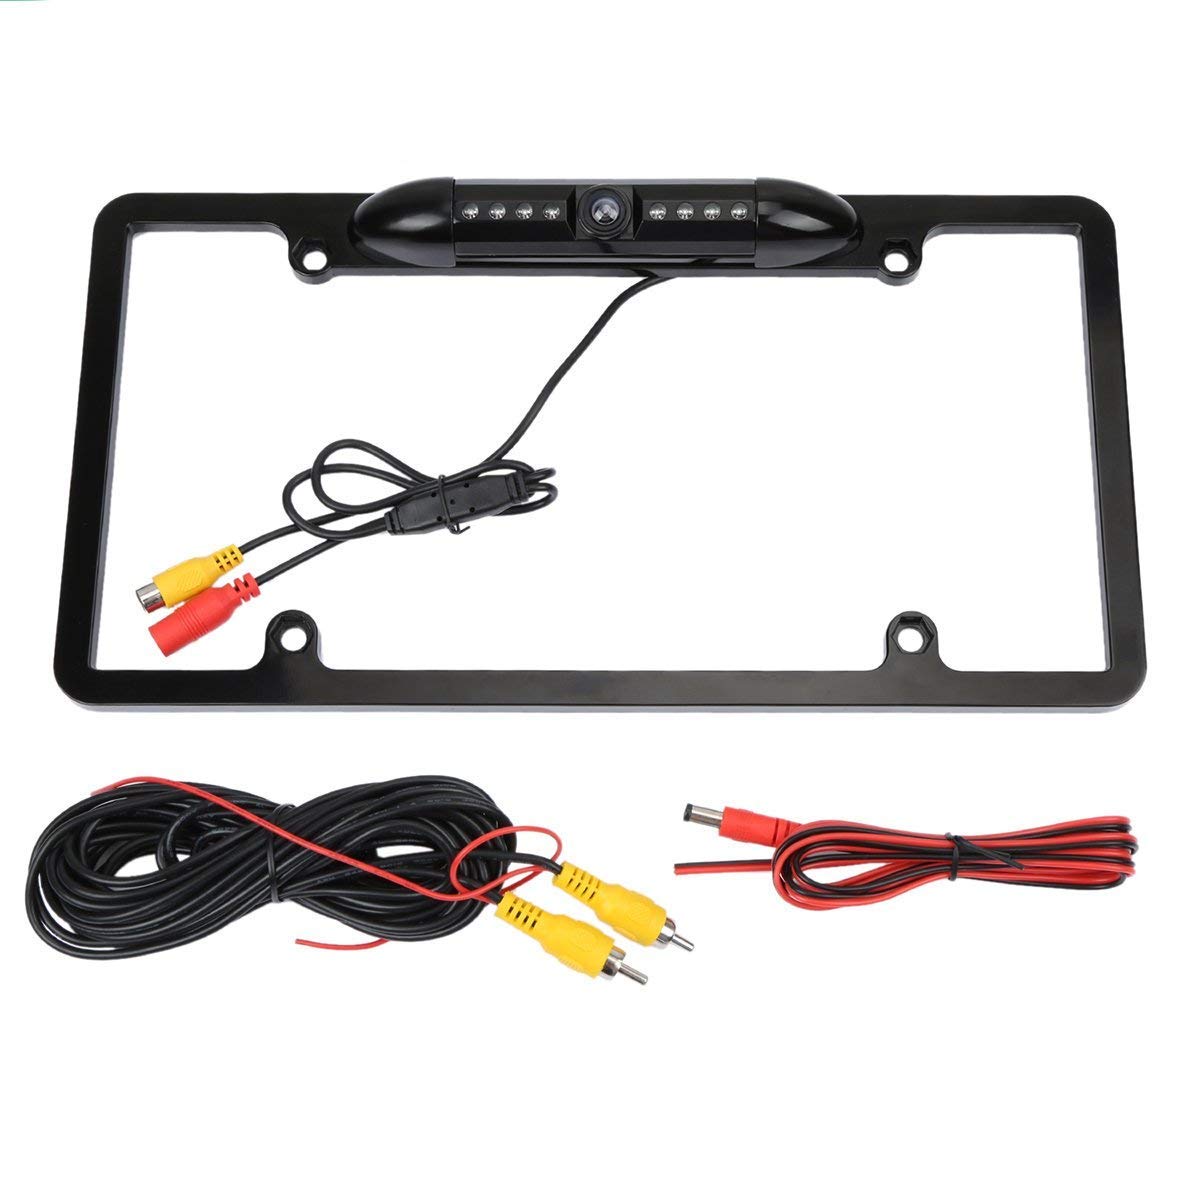 License Plate Frame Backup Camera Night Vision Car Rear View Camera with 8 Bright LEDs 170° Viewing Angle Waterproof Backup Camera Vehicle Universal Reversing Assist Security